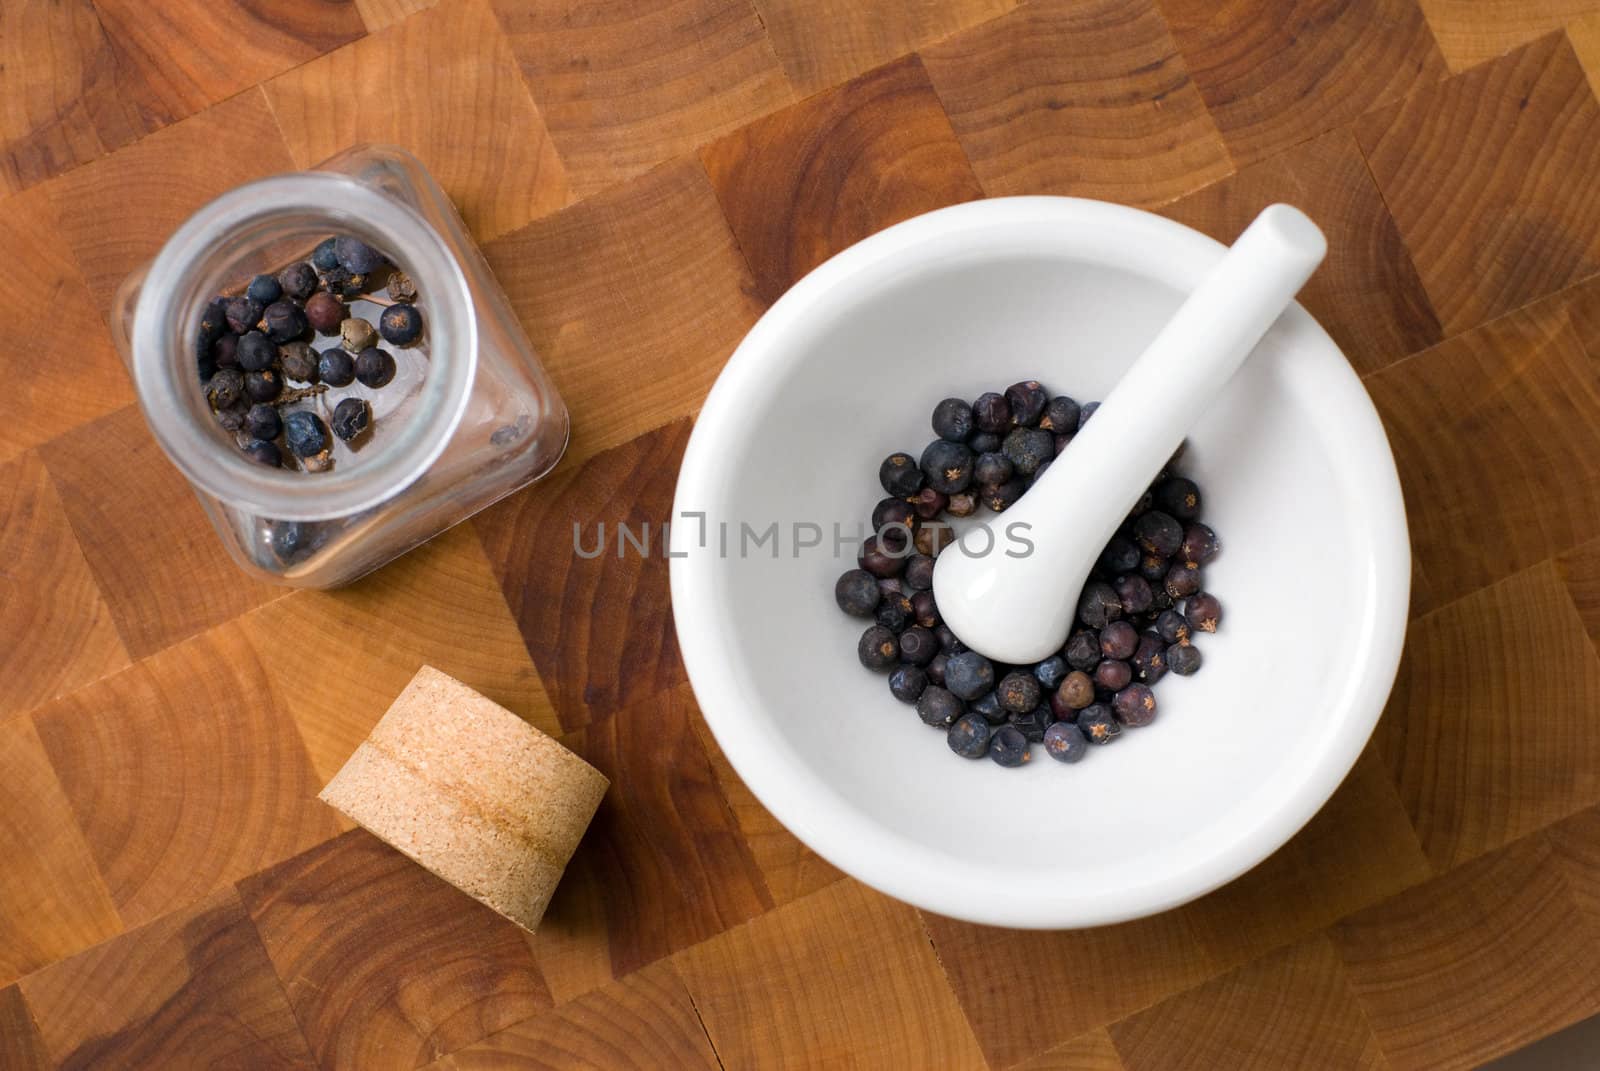 Juniper in ceramic mortar and pestle and glass jar with cork on the cutting board.